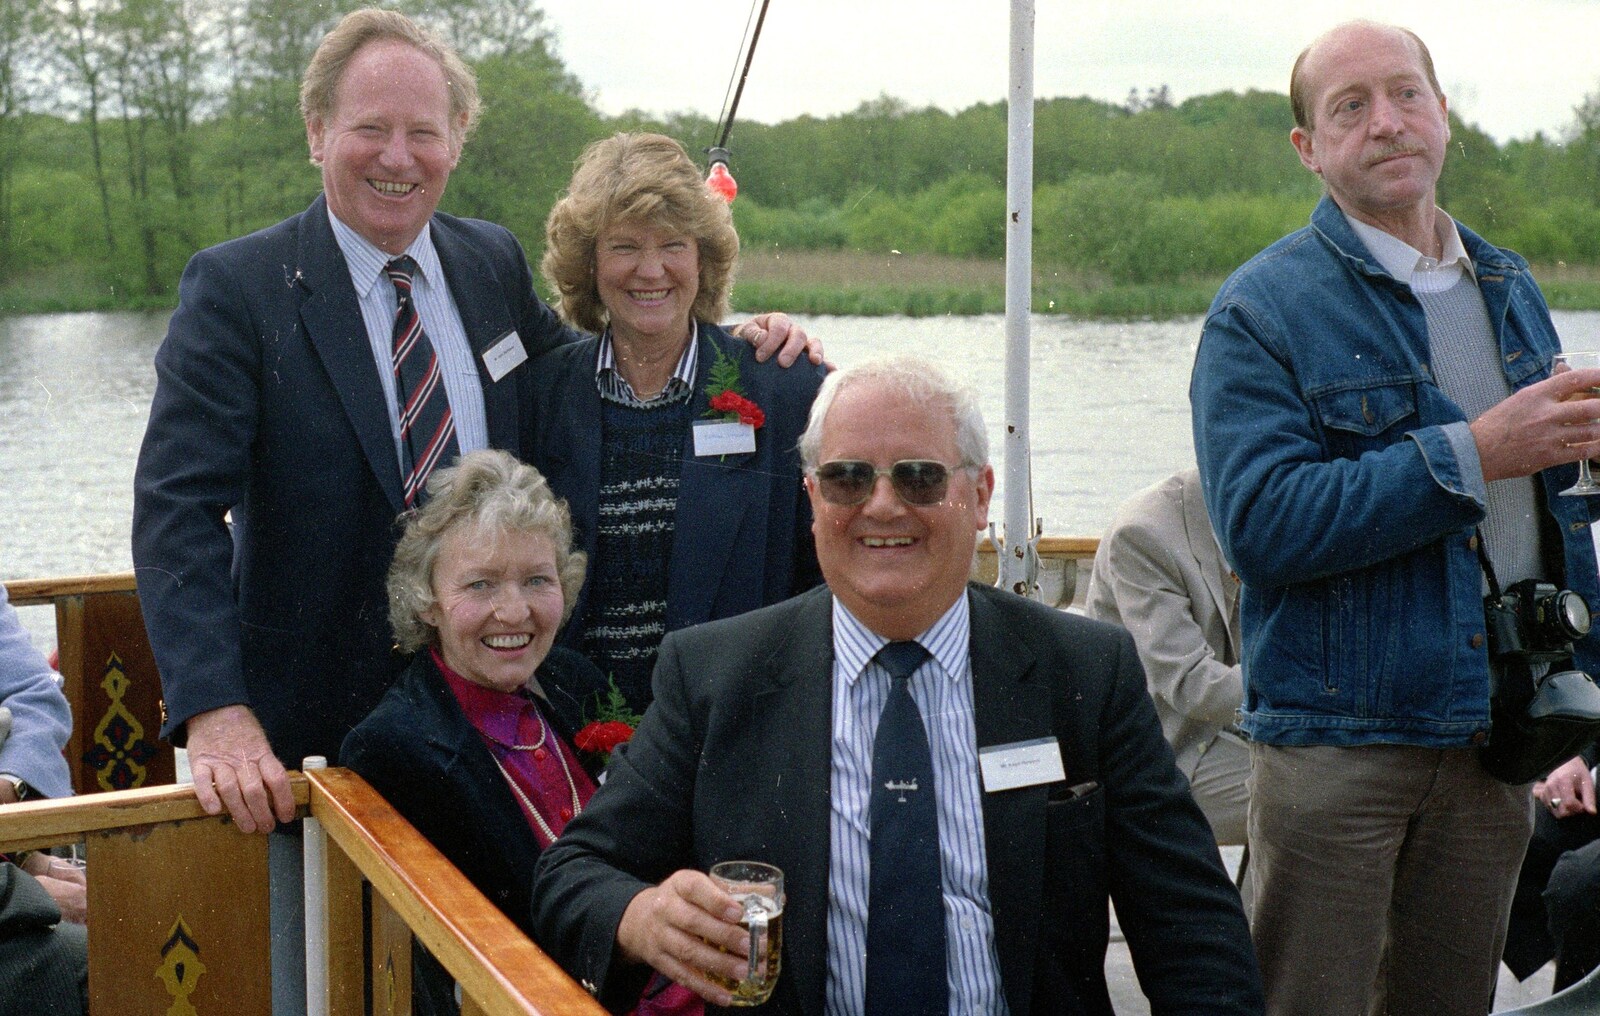 More posed photos from A Soman-Wherry Press Boat Trip, Horning, The Broads, Norfolk - 8th May 1988